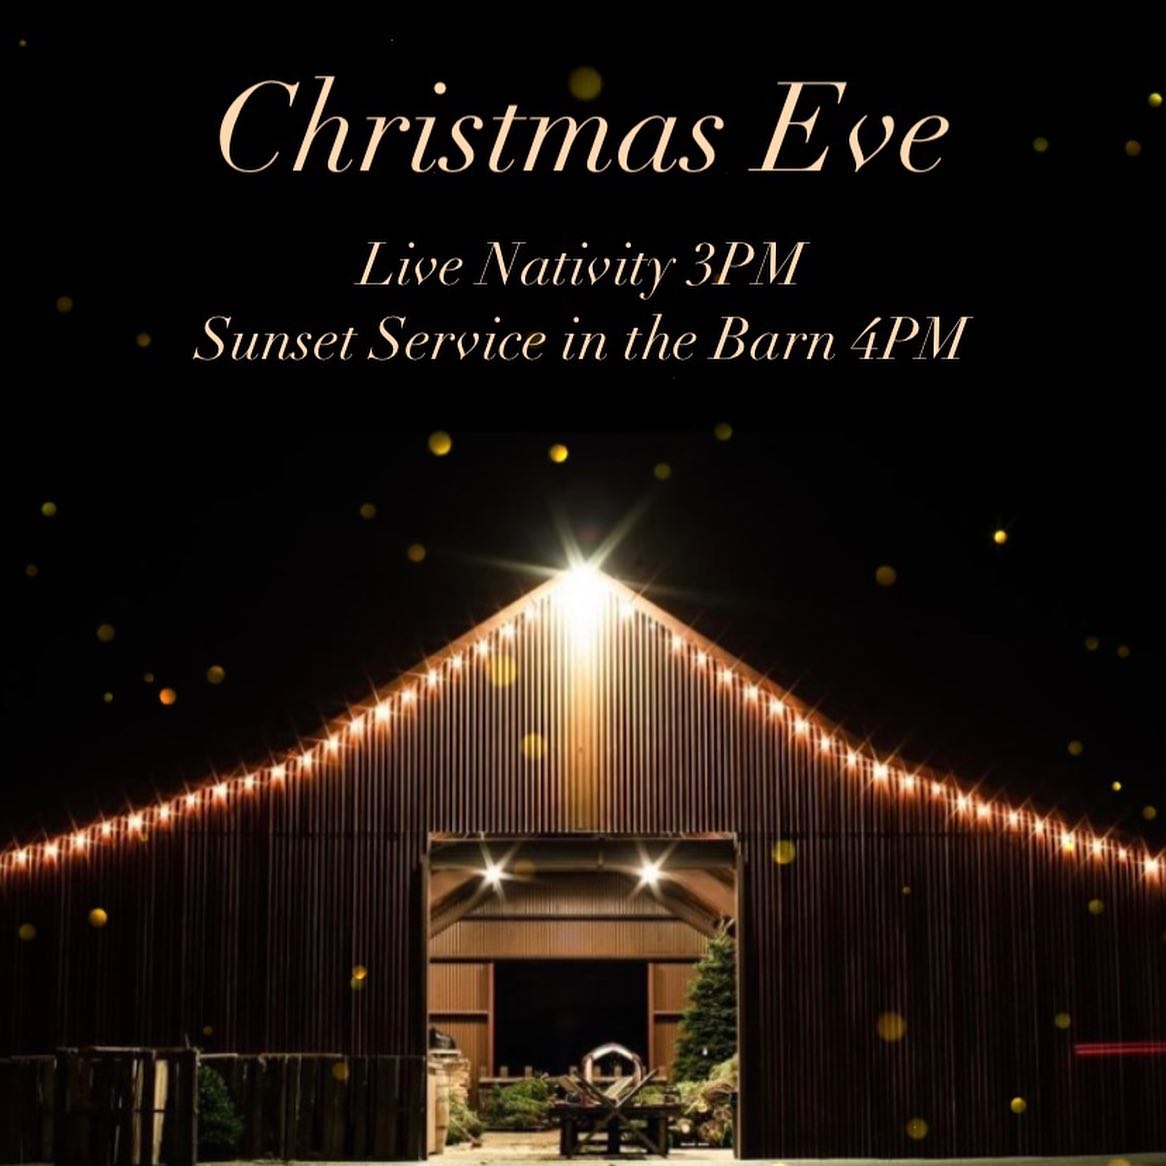 A Thrill of HOPE The weary world rejoices… Invite someone to Christmas Eve @fallbrookvineyardchurch 1924 E. Mission Rd, Fallbrook CA 92028Live Nativity 3PMSunset Service in the Barn 4PM🤍Chairs provided🤍@thevineyard1924 #athrillofhope #wonder #jesus #messiah #savior #godwithus #emmanuel #christmaseve #vineyardchristmas #christmasinthebarn #countrychristmas